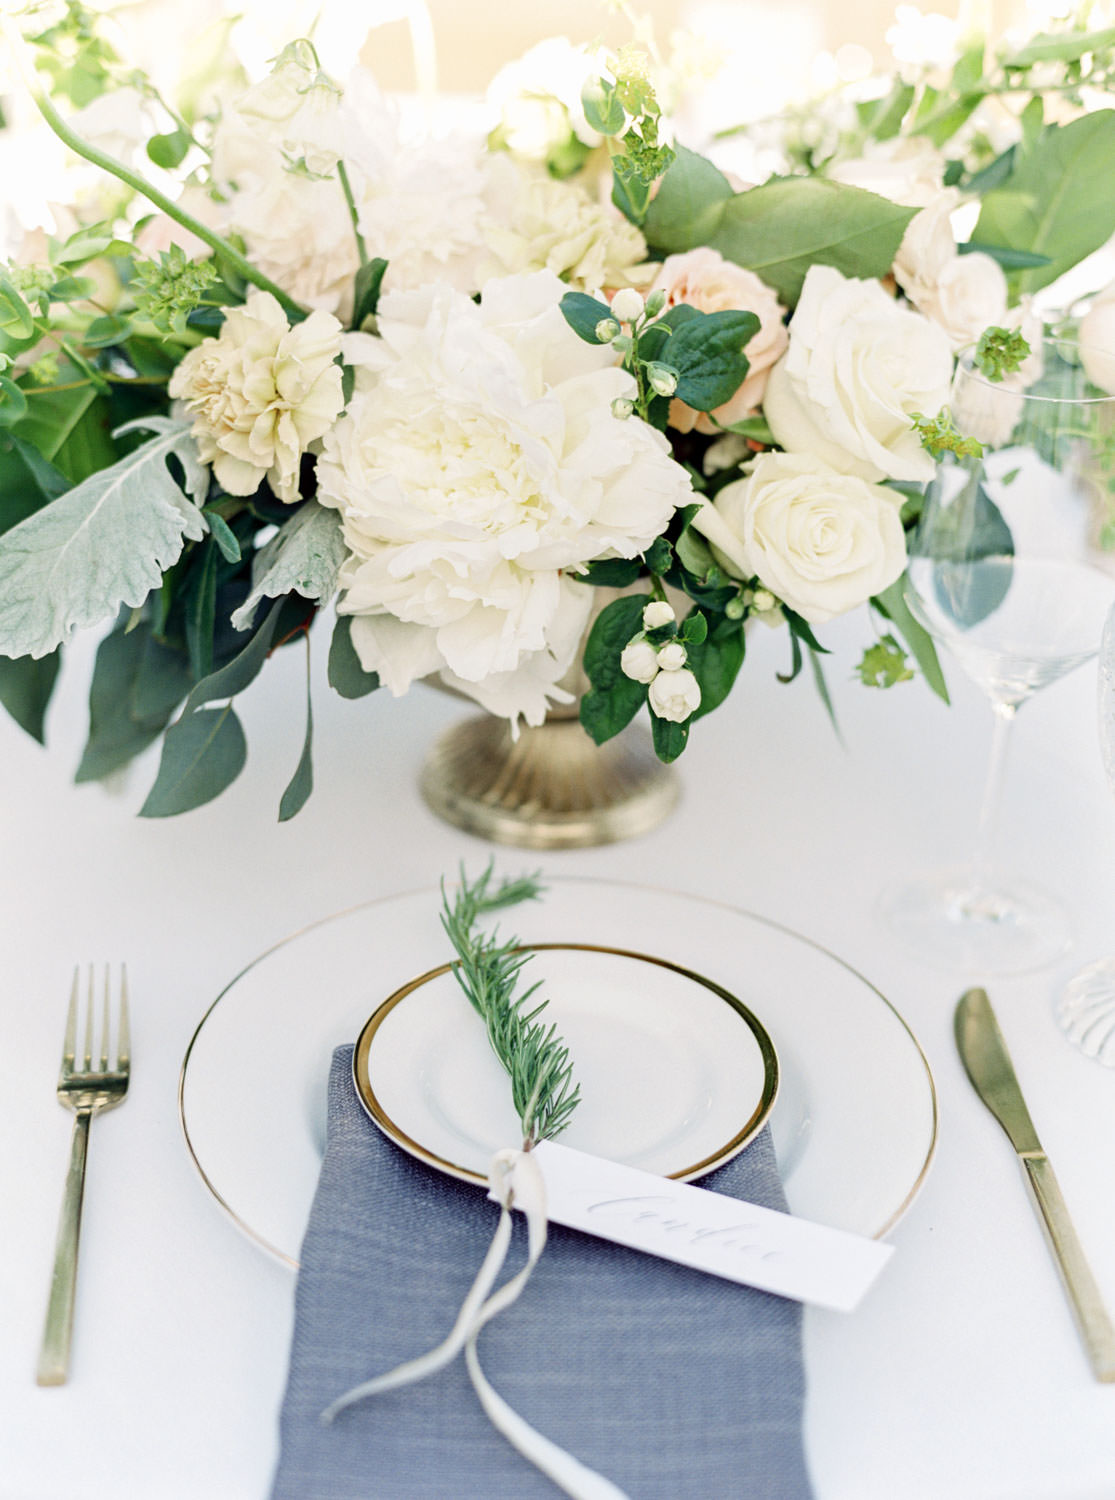 Wedding ideas with the color white: White table decoration